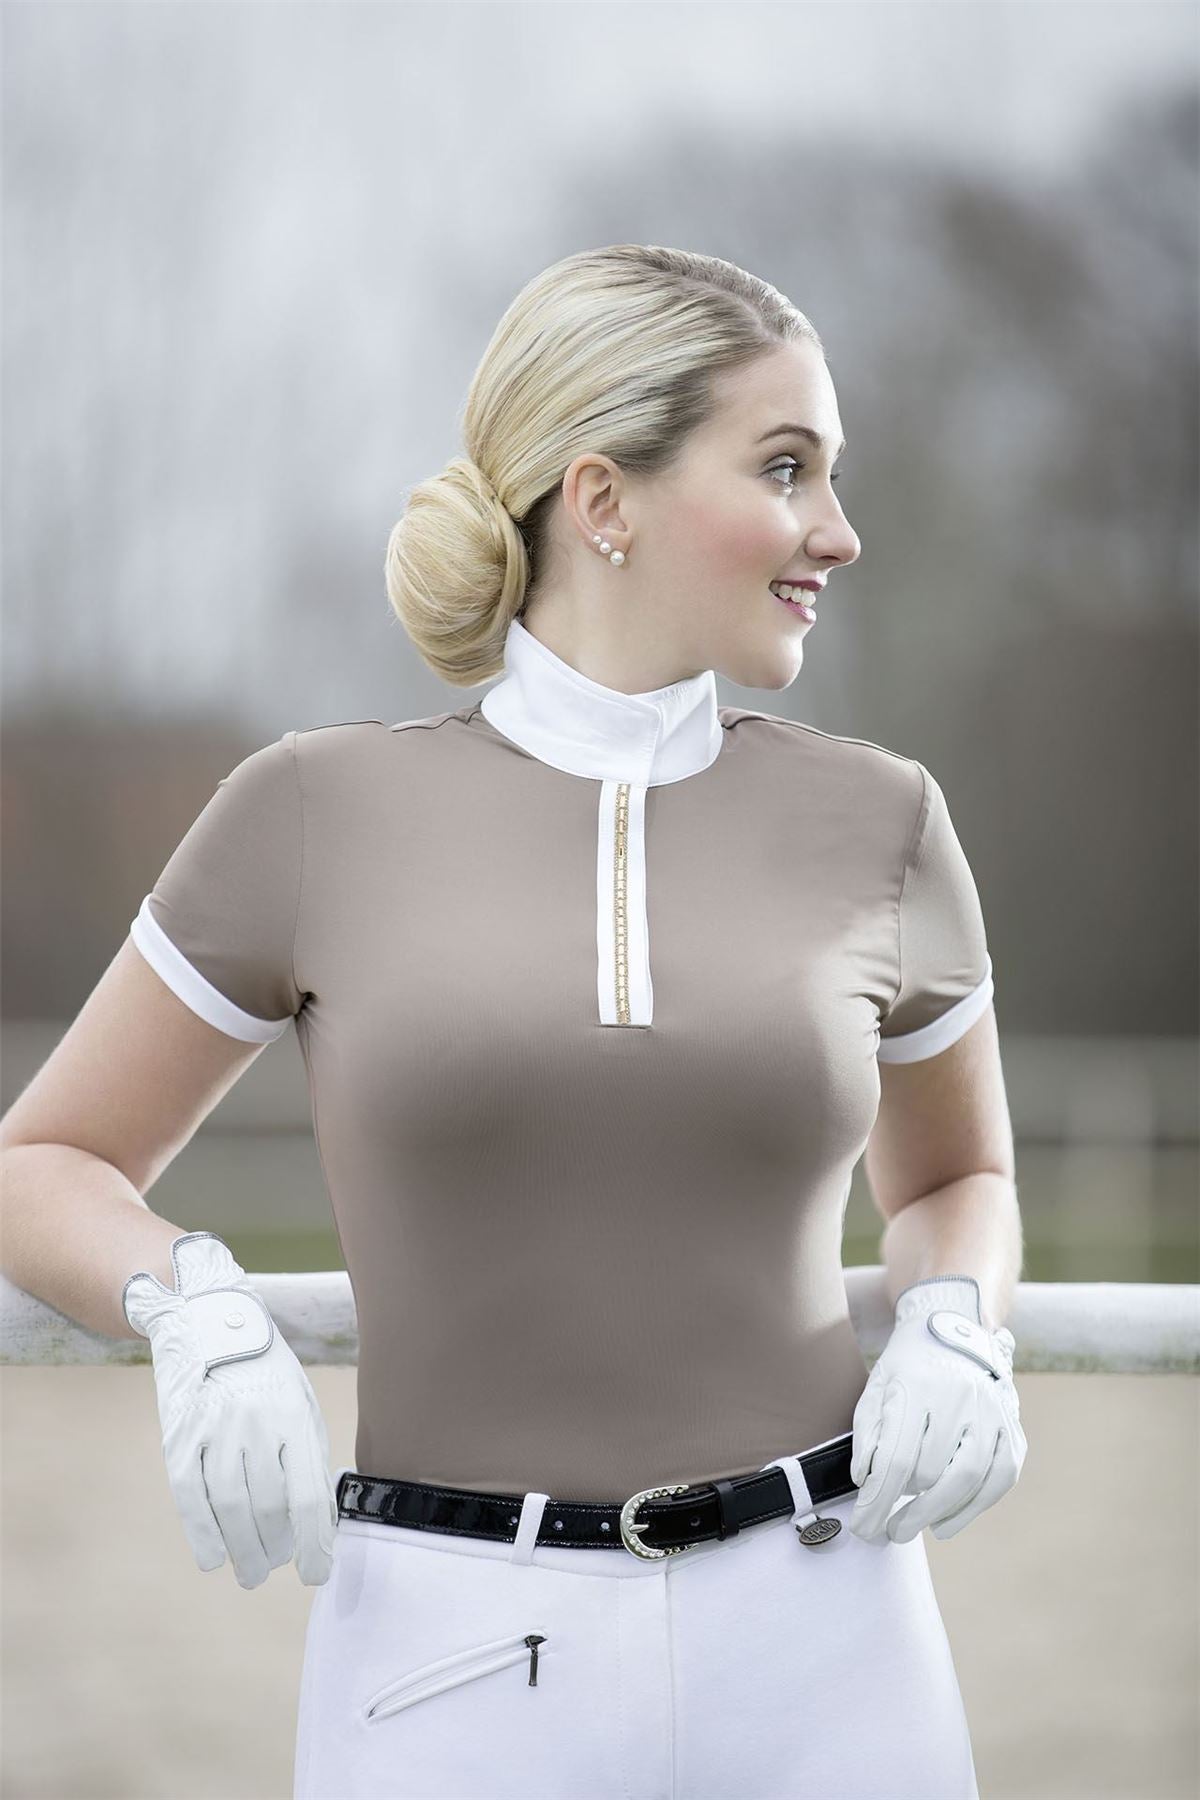 HKM Competition Shirt Crystal - Just Horse Riders